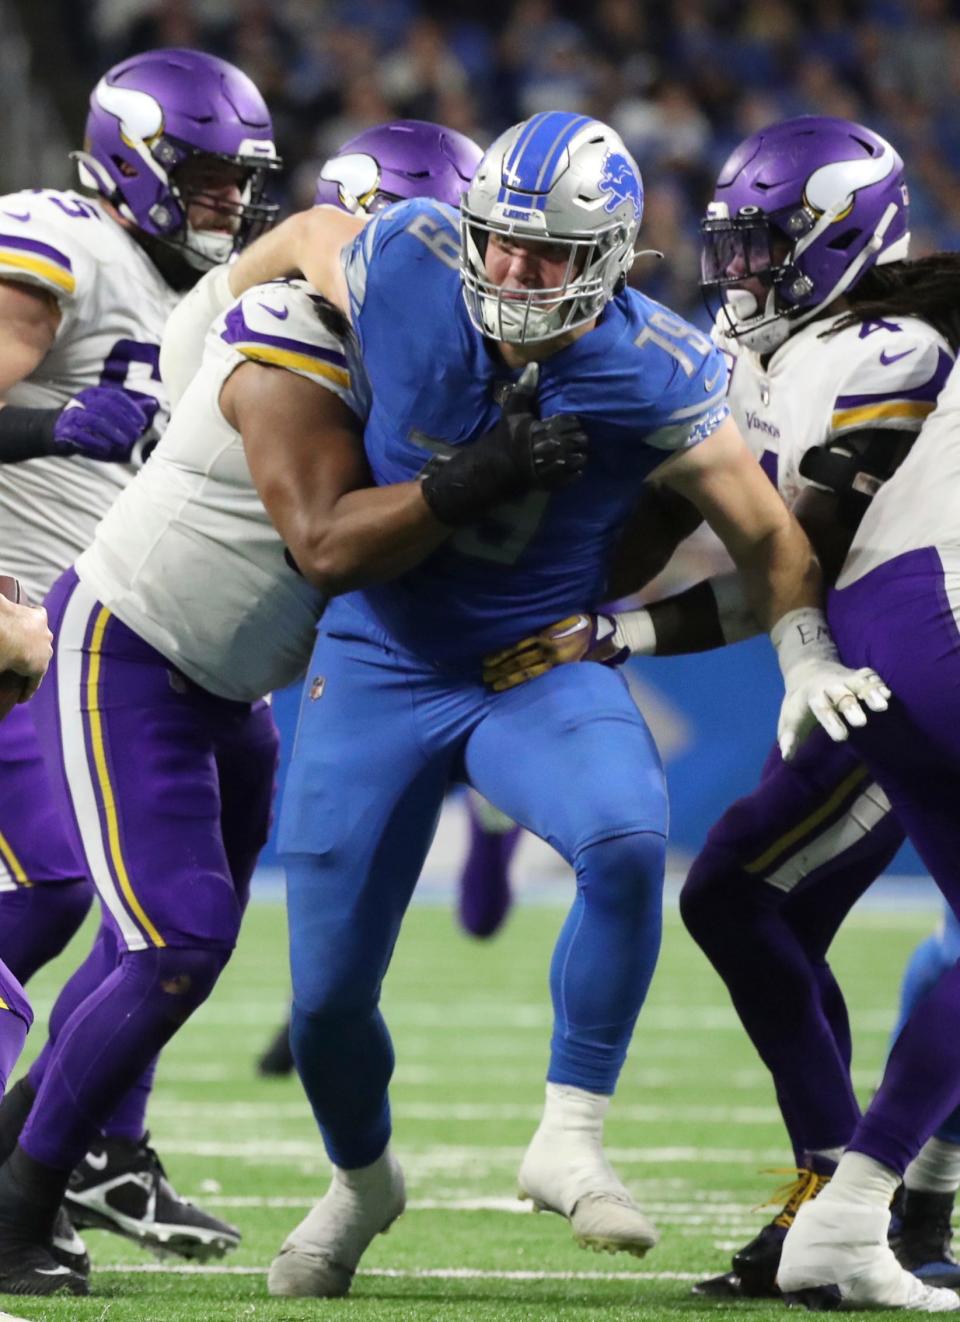 Lions defensive end John Cominsky rushes against the Vikings during the second half of the Lions' 34-23 win over the Vikings on Sunday, Dec. 11, 2022, at Ford Field.